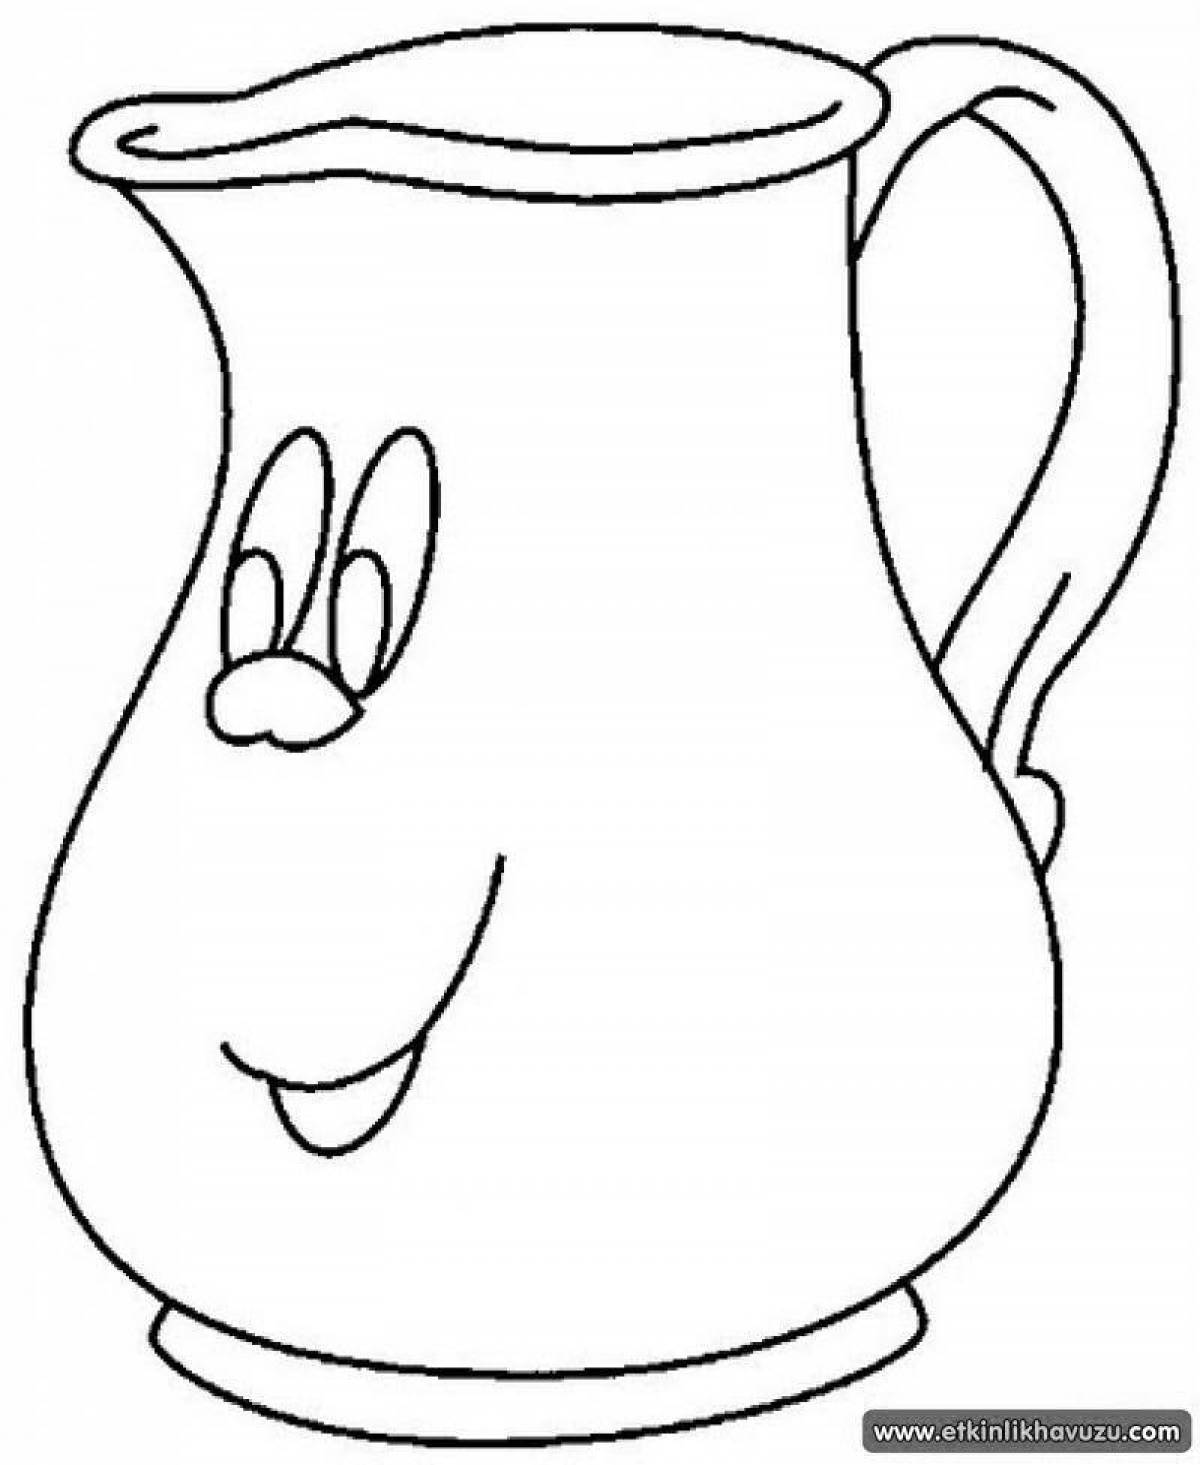 Colorful jug coloring page for kids